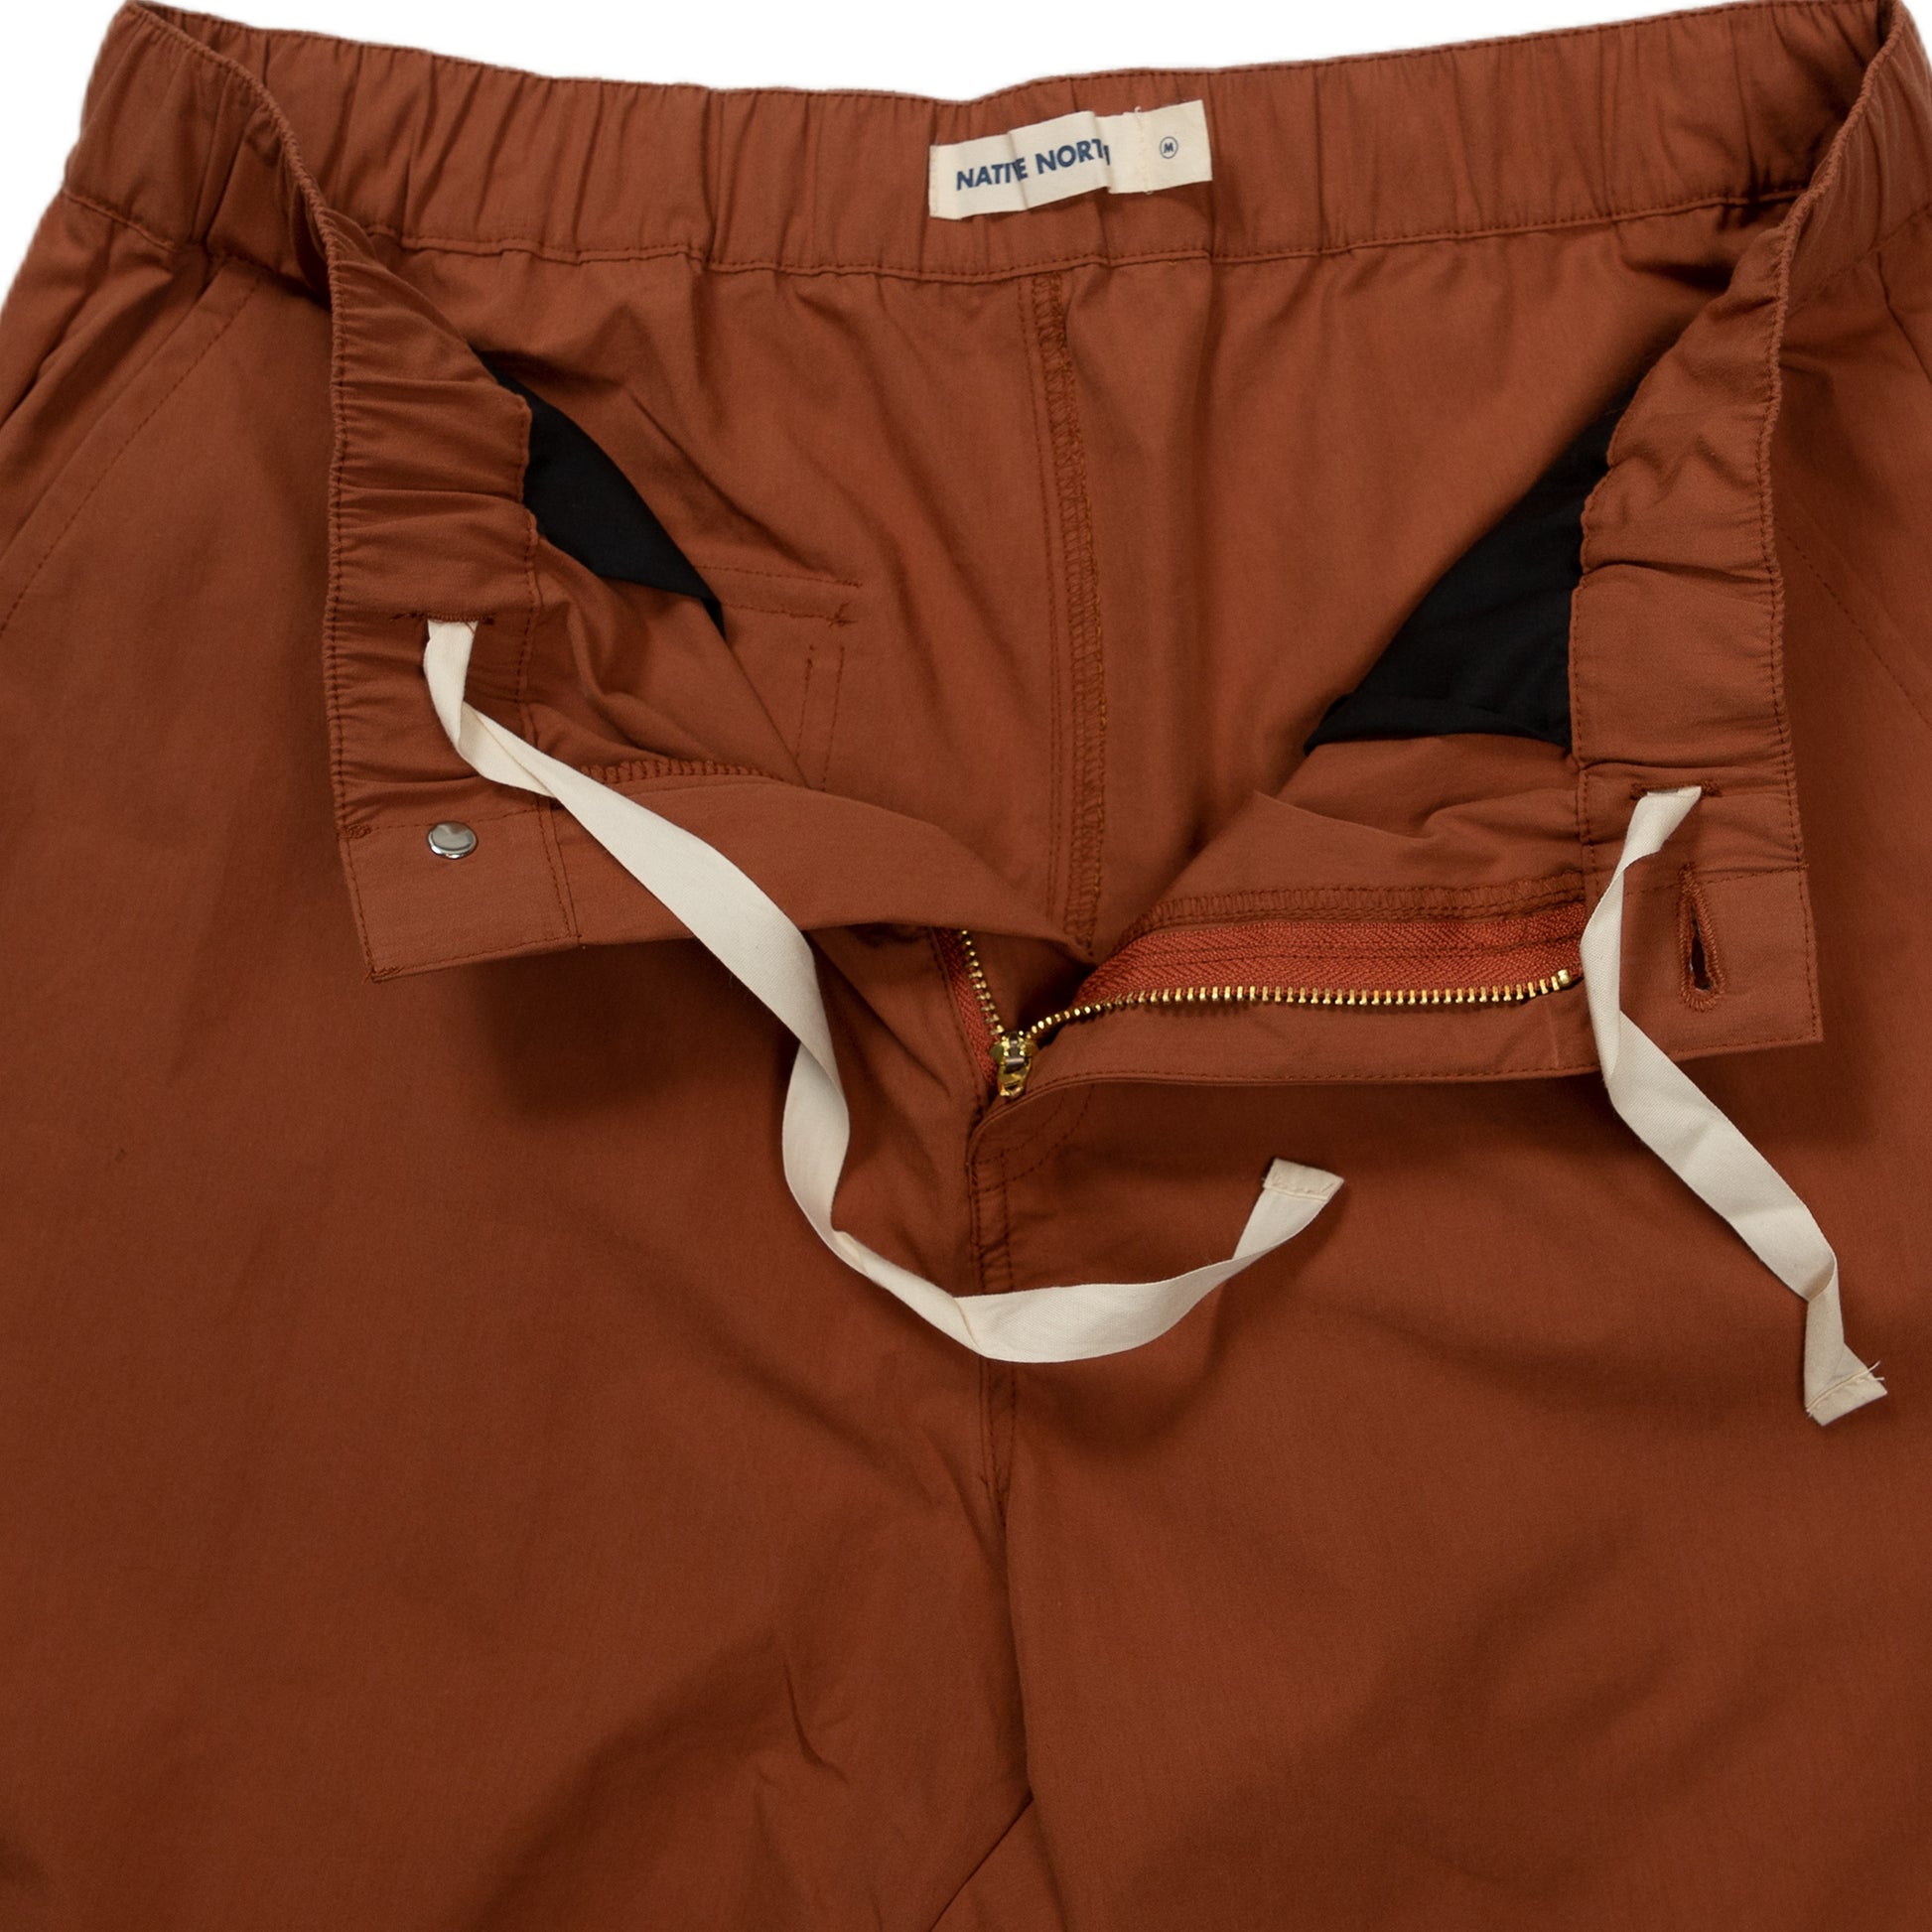 native north paper shorts bottoms rust detail